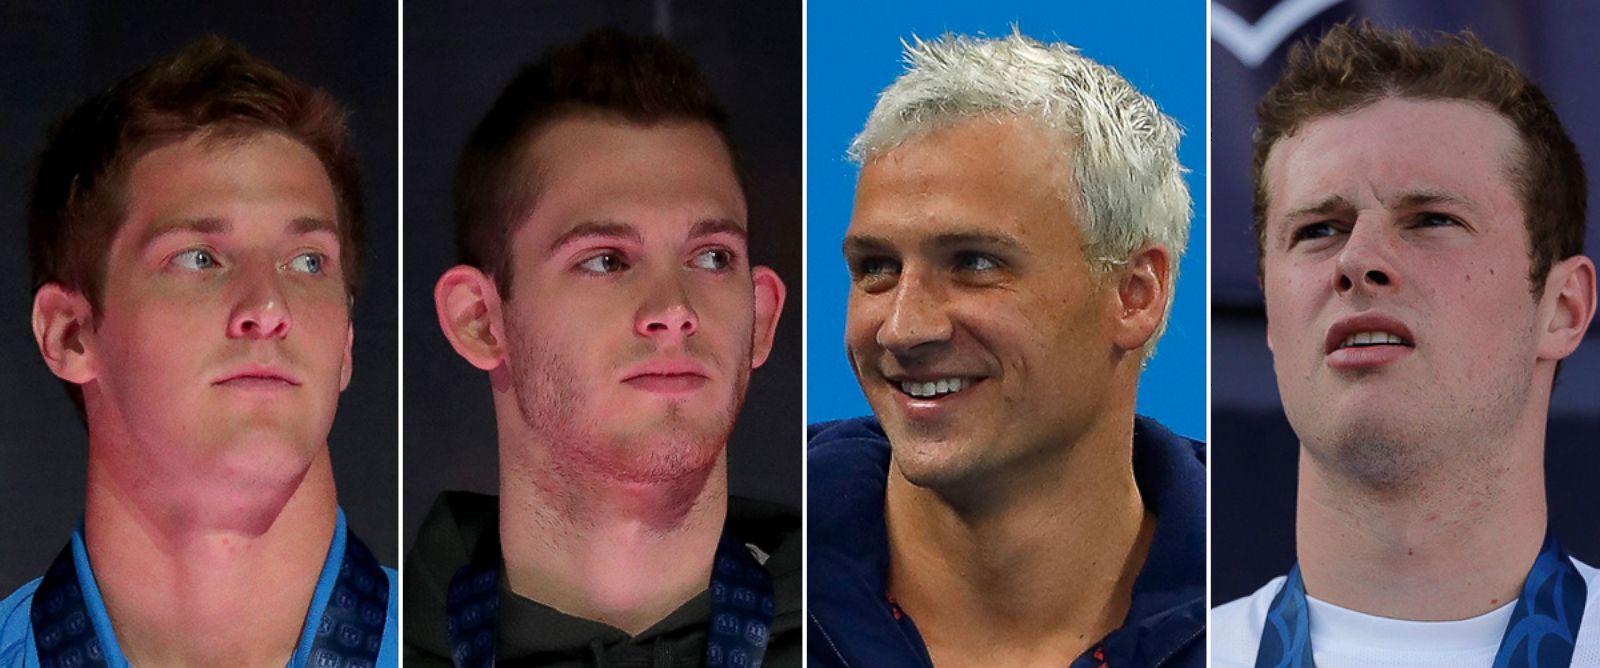 PHOTO: U.S. Olympic swimmers Jimmy Feigen, Gunnar Bentz, Ryan Lochte and Jack Conger claim they were robbed while in Rio de Janeiro, Brazil for the 2016 Olympics.